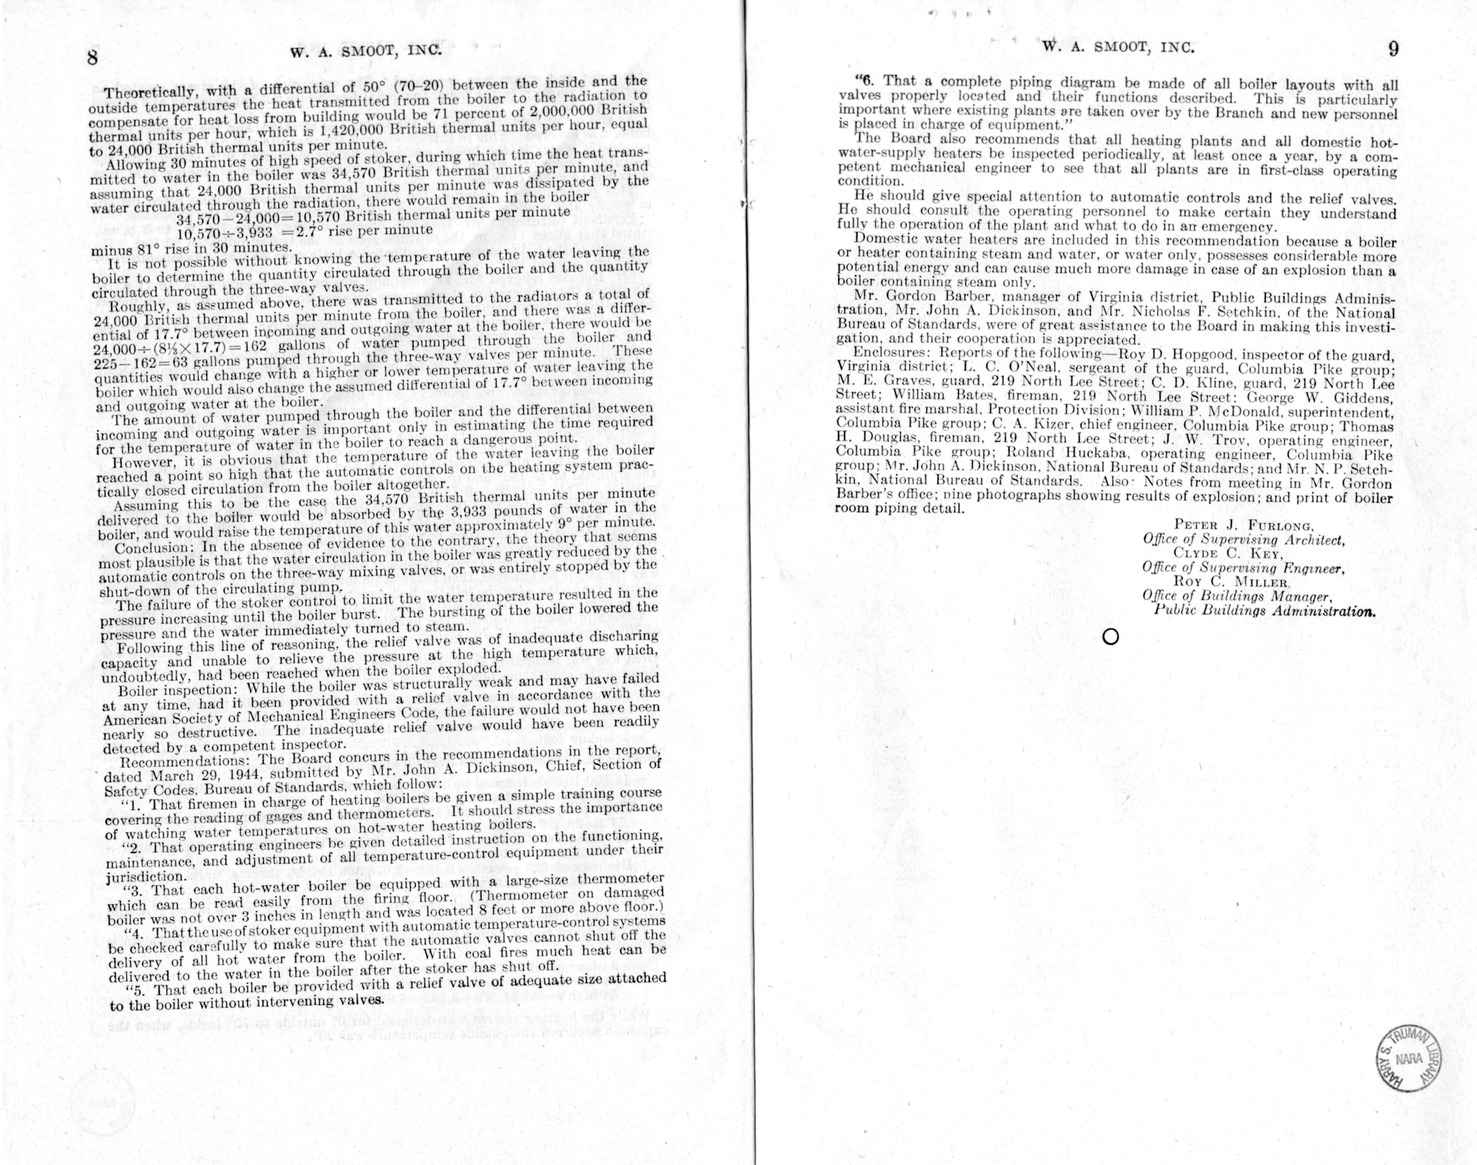 Memorandum from Frederick J. Bailey to M. C. Latta, H.R. 1058, For the Relief of W.A. Smoot, Incorporated, with Attachments